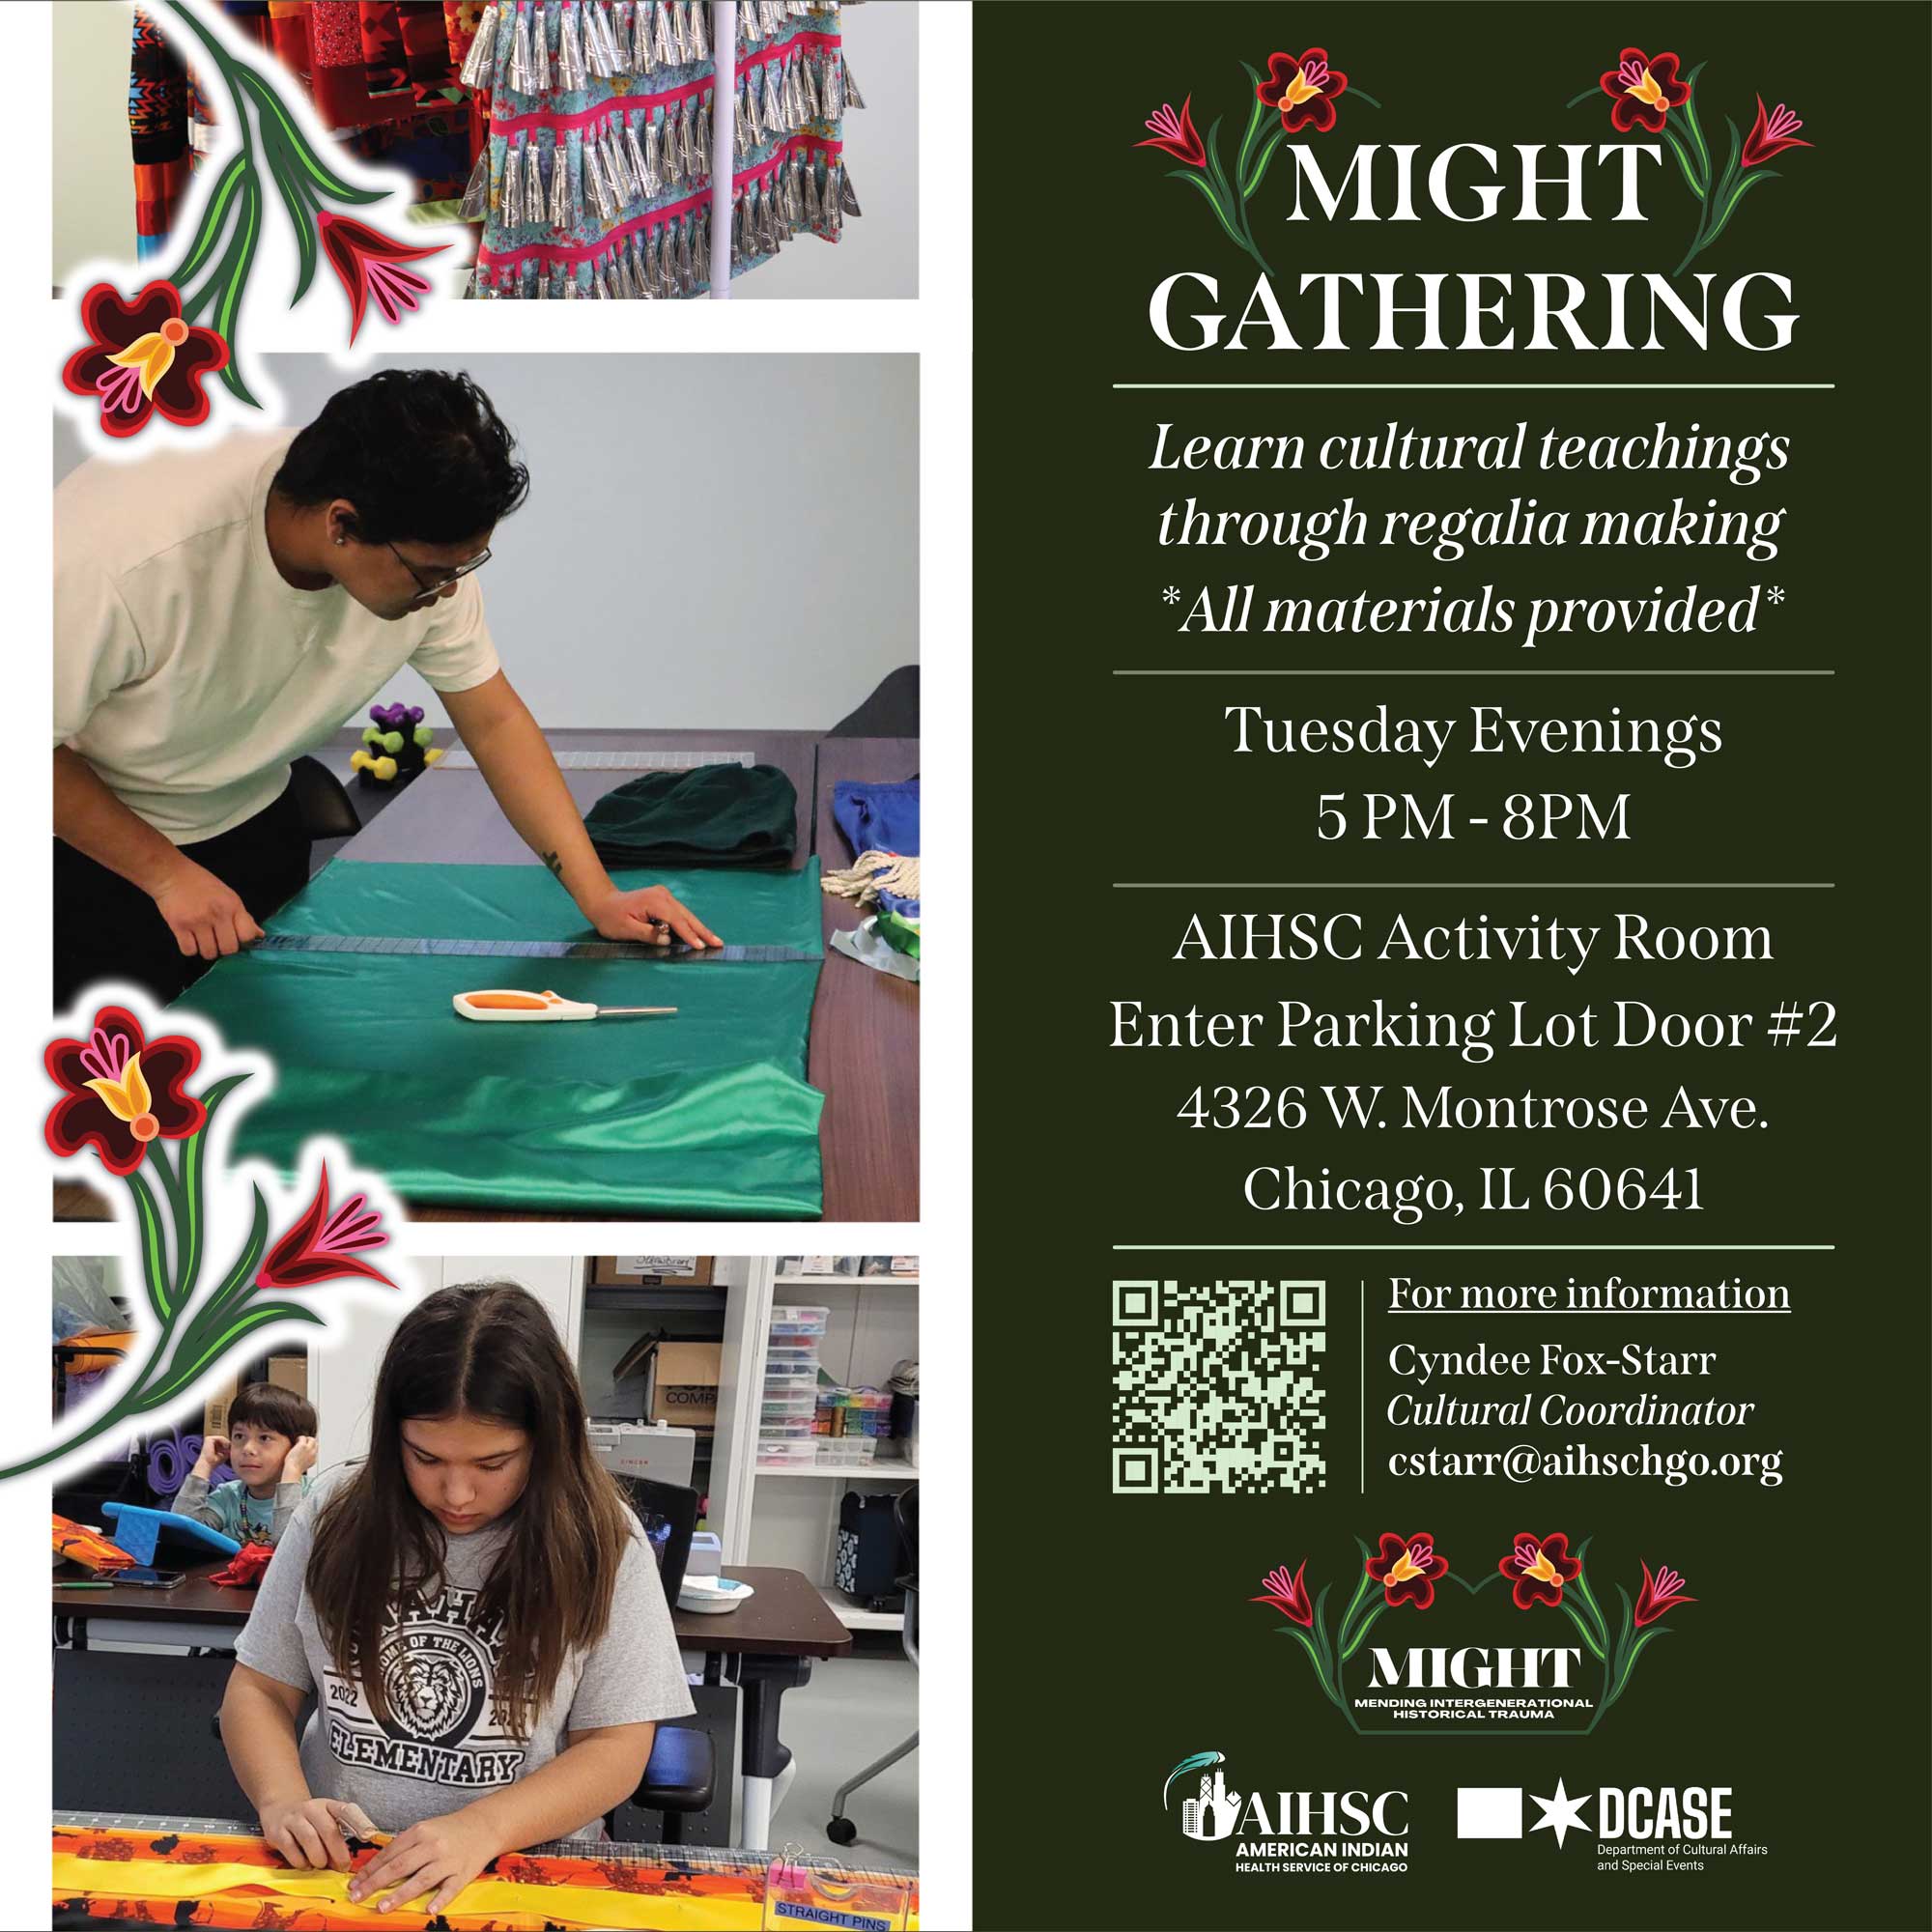 MIGHT gathering - sewing, regalia making, cultural teachings